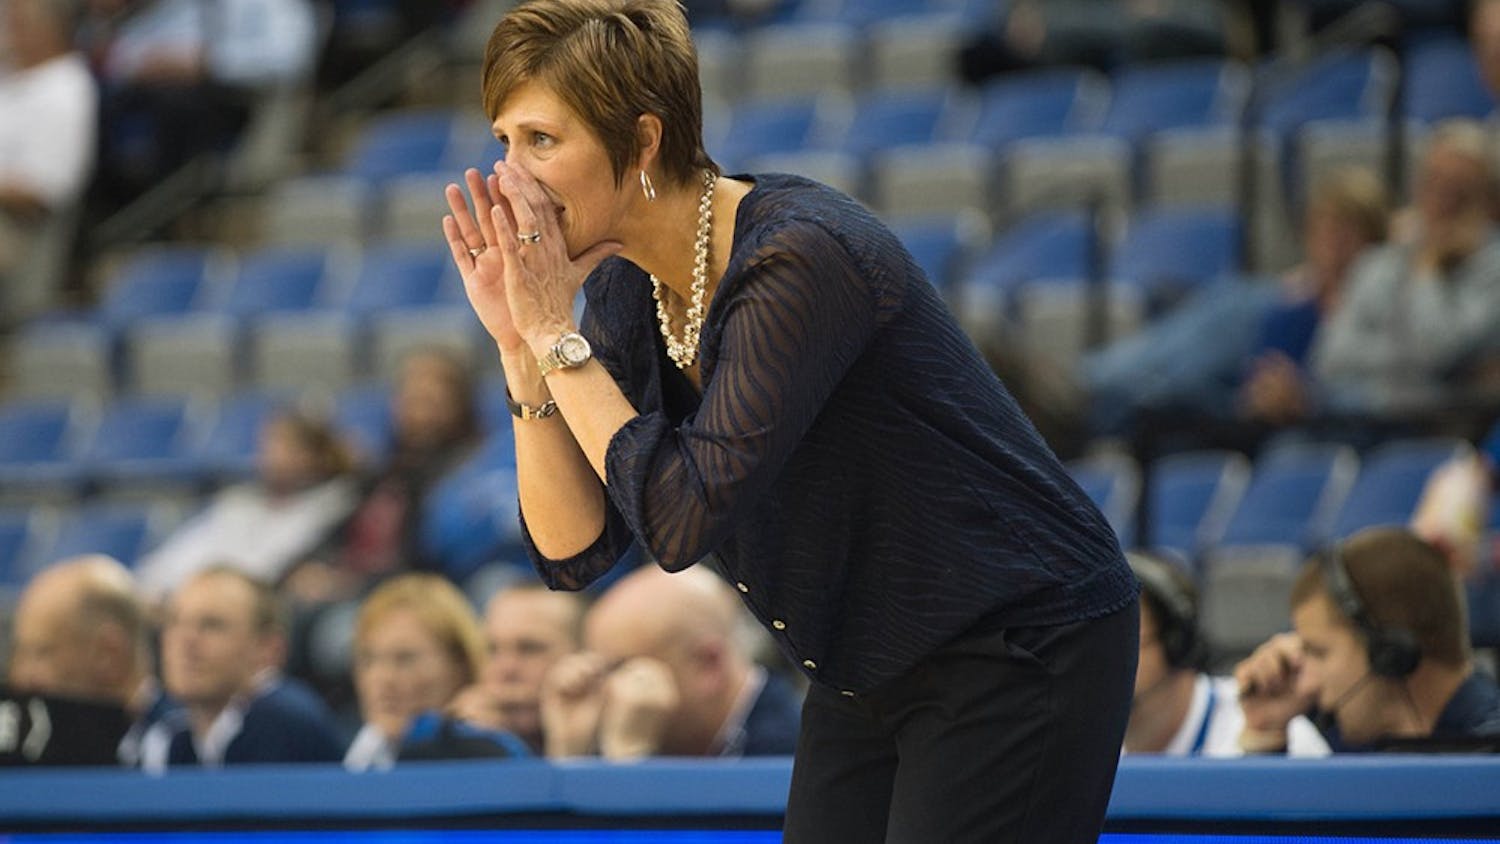 Then Indiana State Coach Teri Moren during a game against IU. Moren is the new IU Women's Basketball coach.